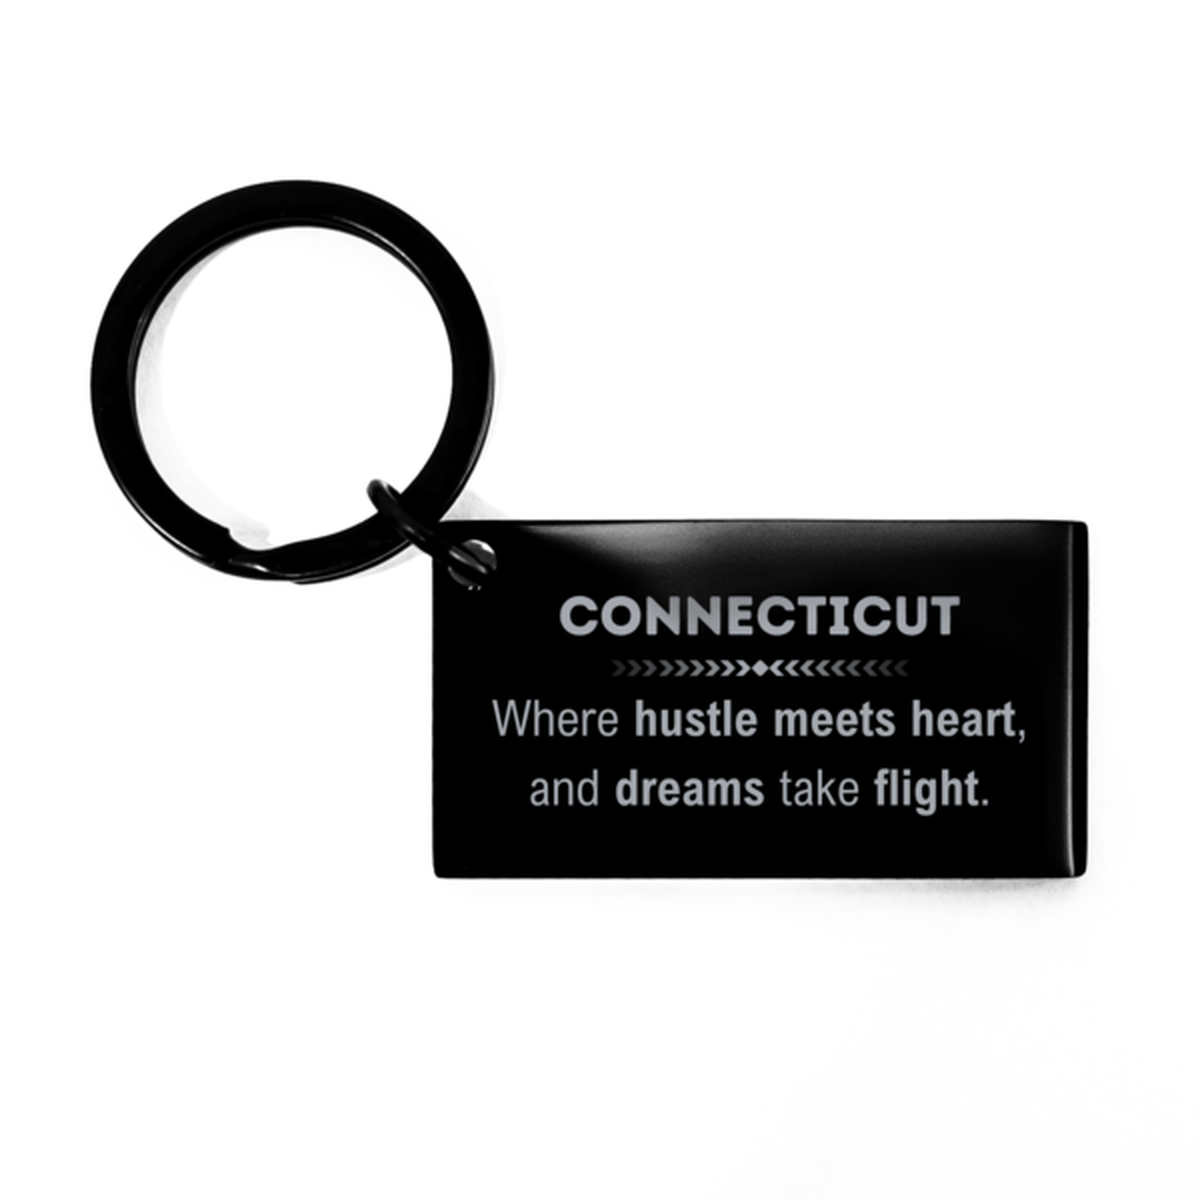 Connecticut: Where hustle meets heart, and dreams take flight, Connecticut Gifts, Proud Connecticut Christmas Birthday Connecticut Keychain, Connecticut State People, Men, Women, Friends